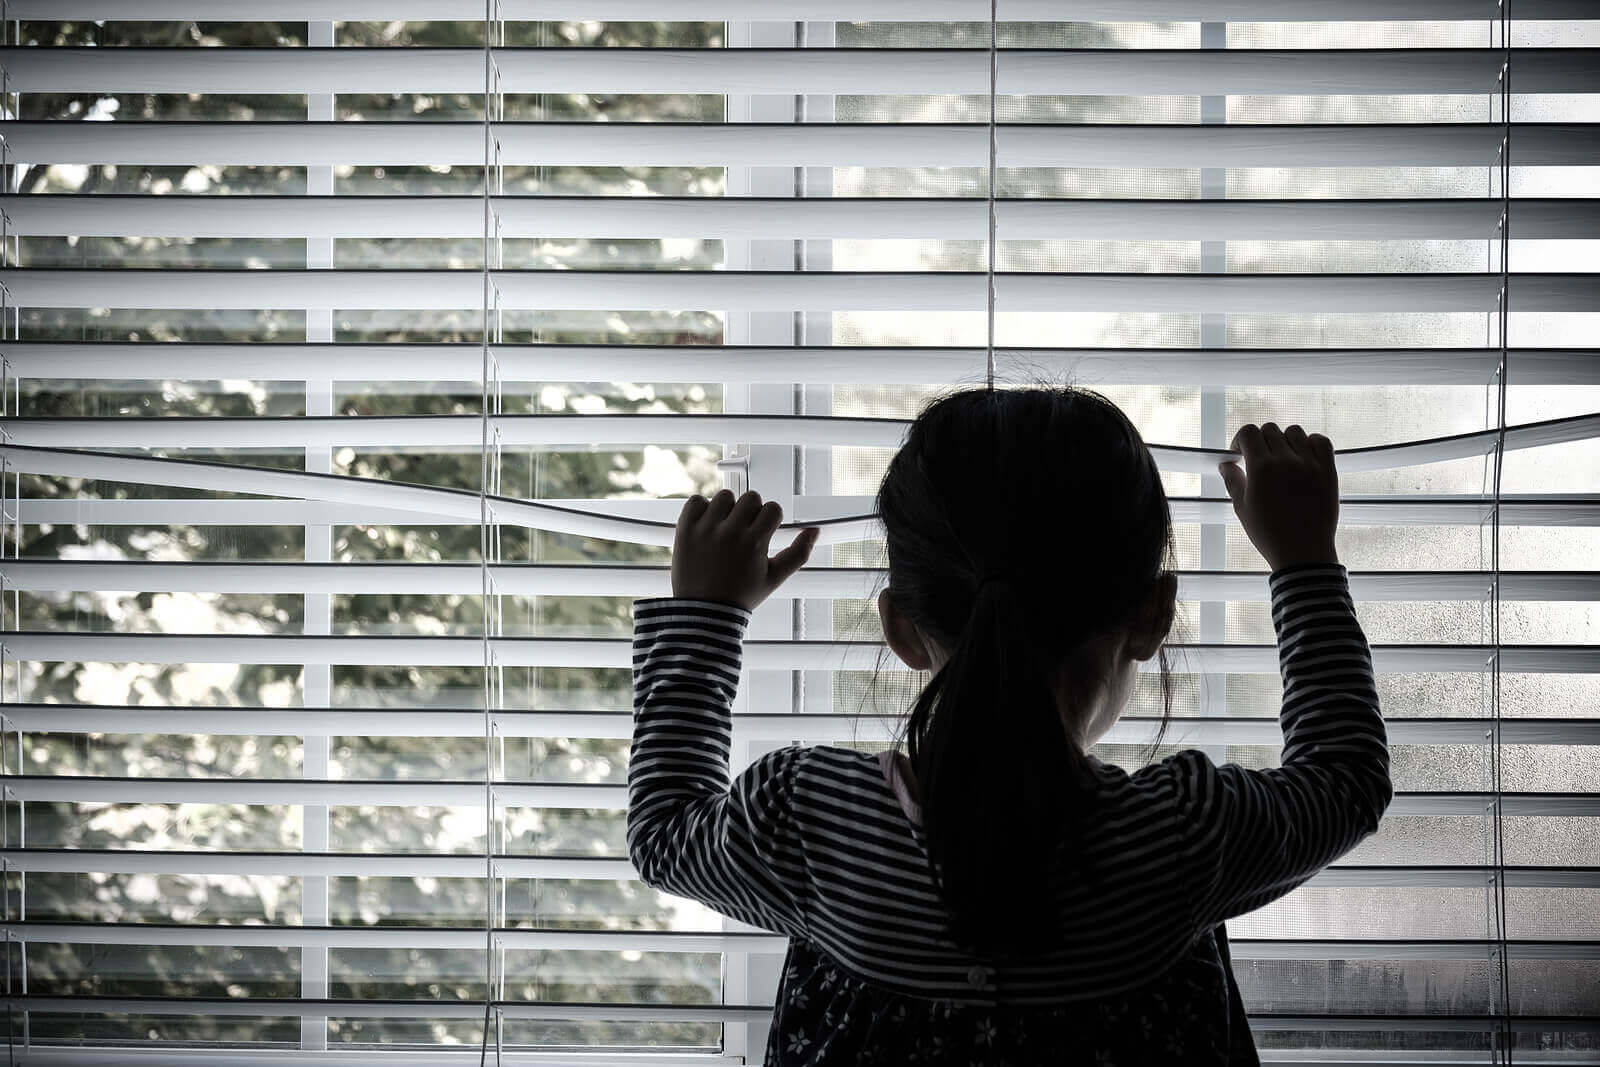 A little girl looking out the blinds of a window.